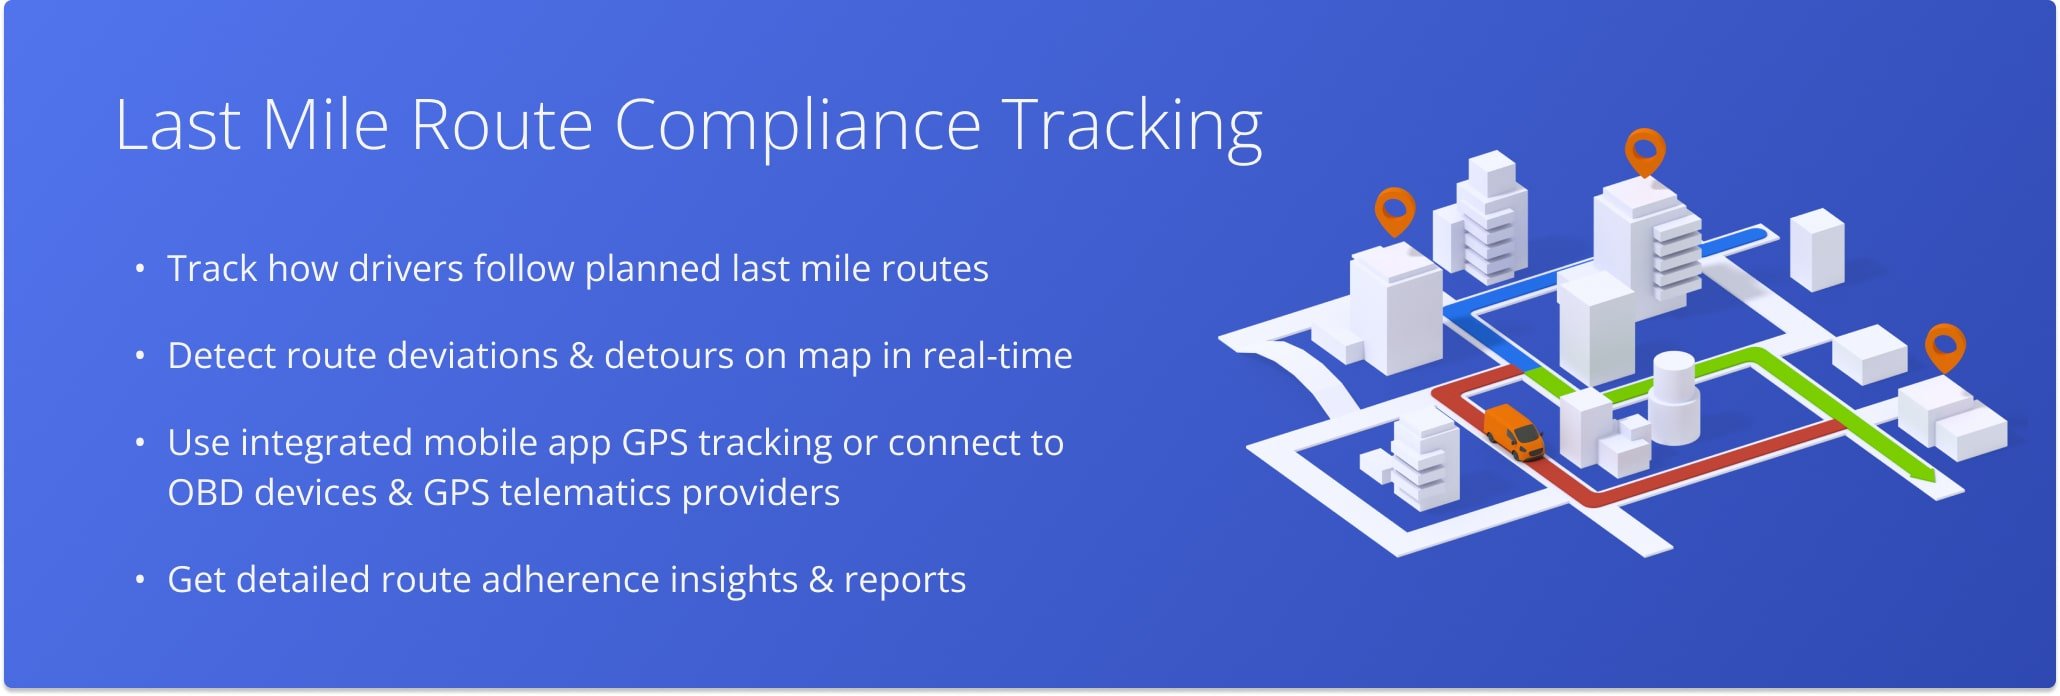 Route4Me's compliance tracking enables you to see if planned routes are followed, when and where deviations and detours occur, how much of the planned route was completed, and more.